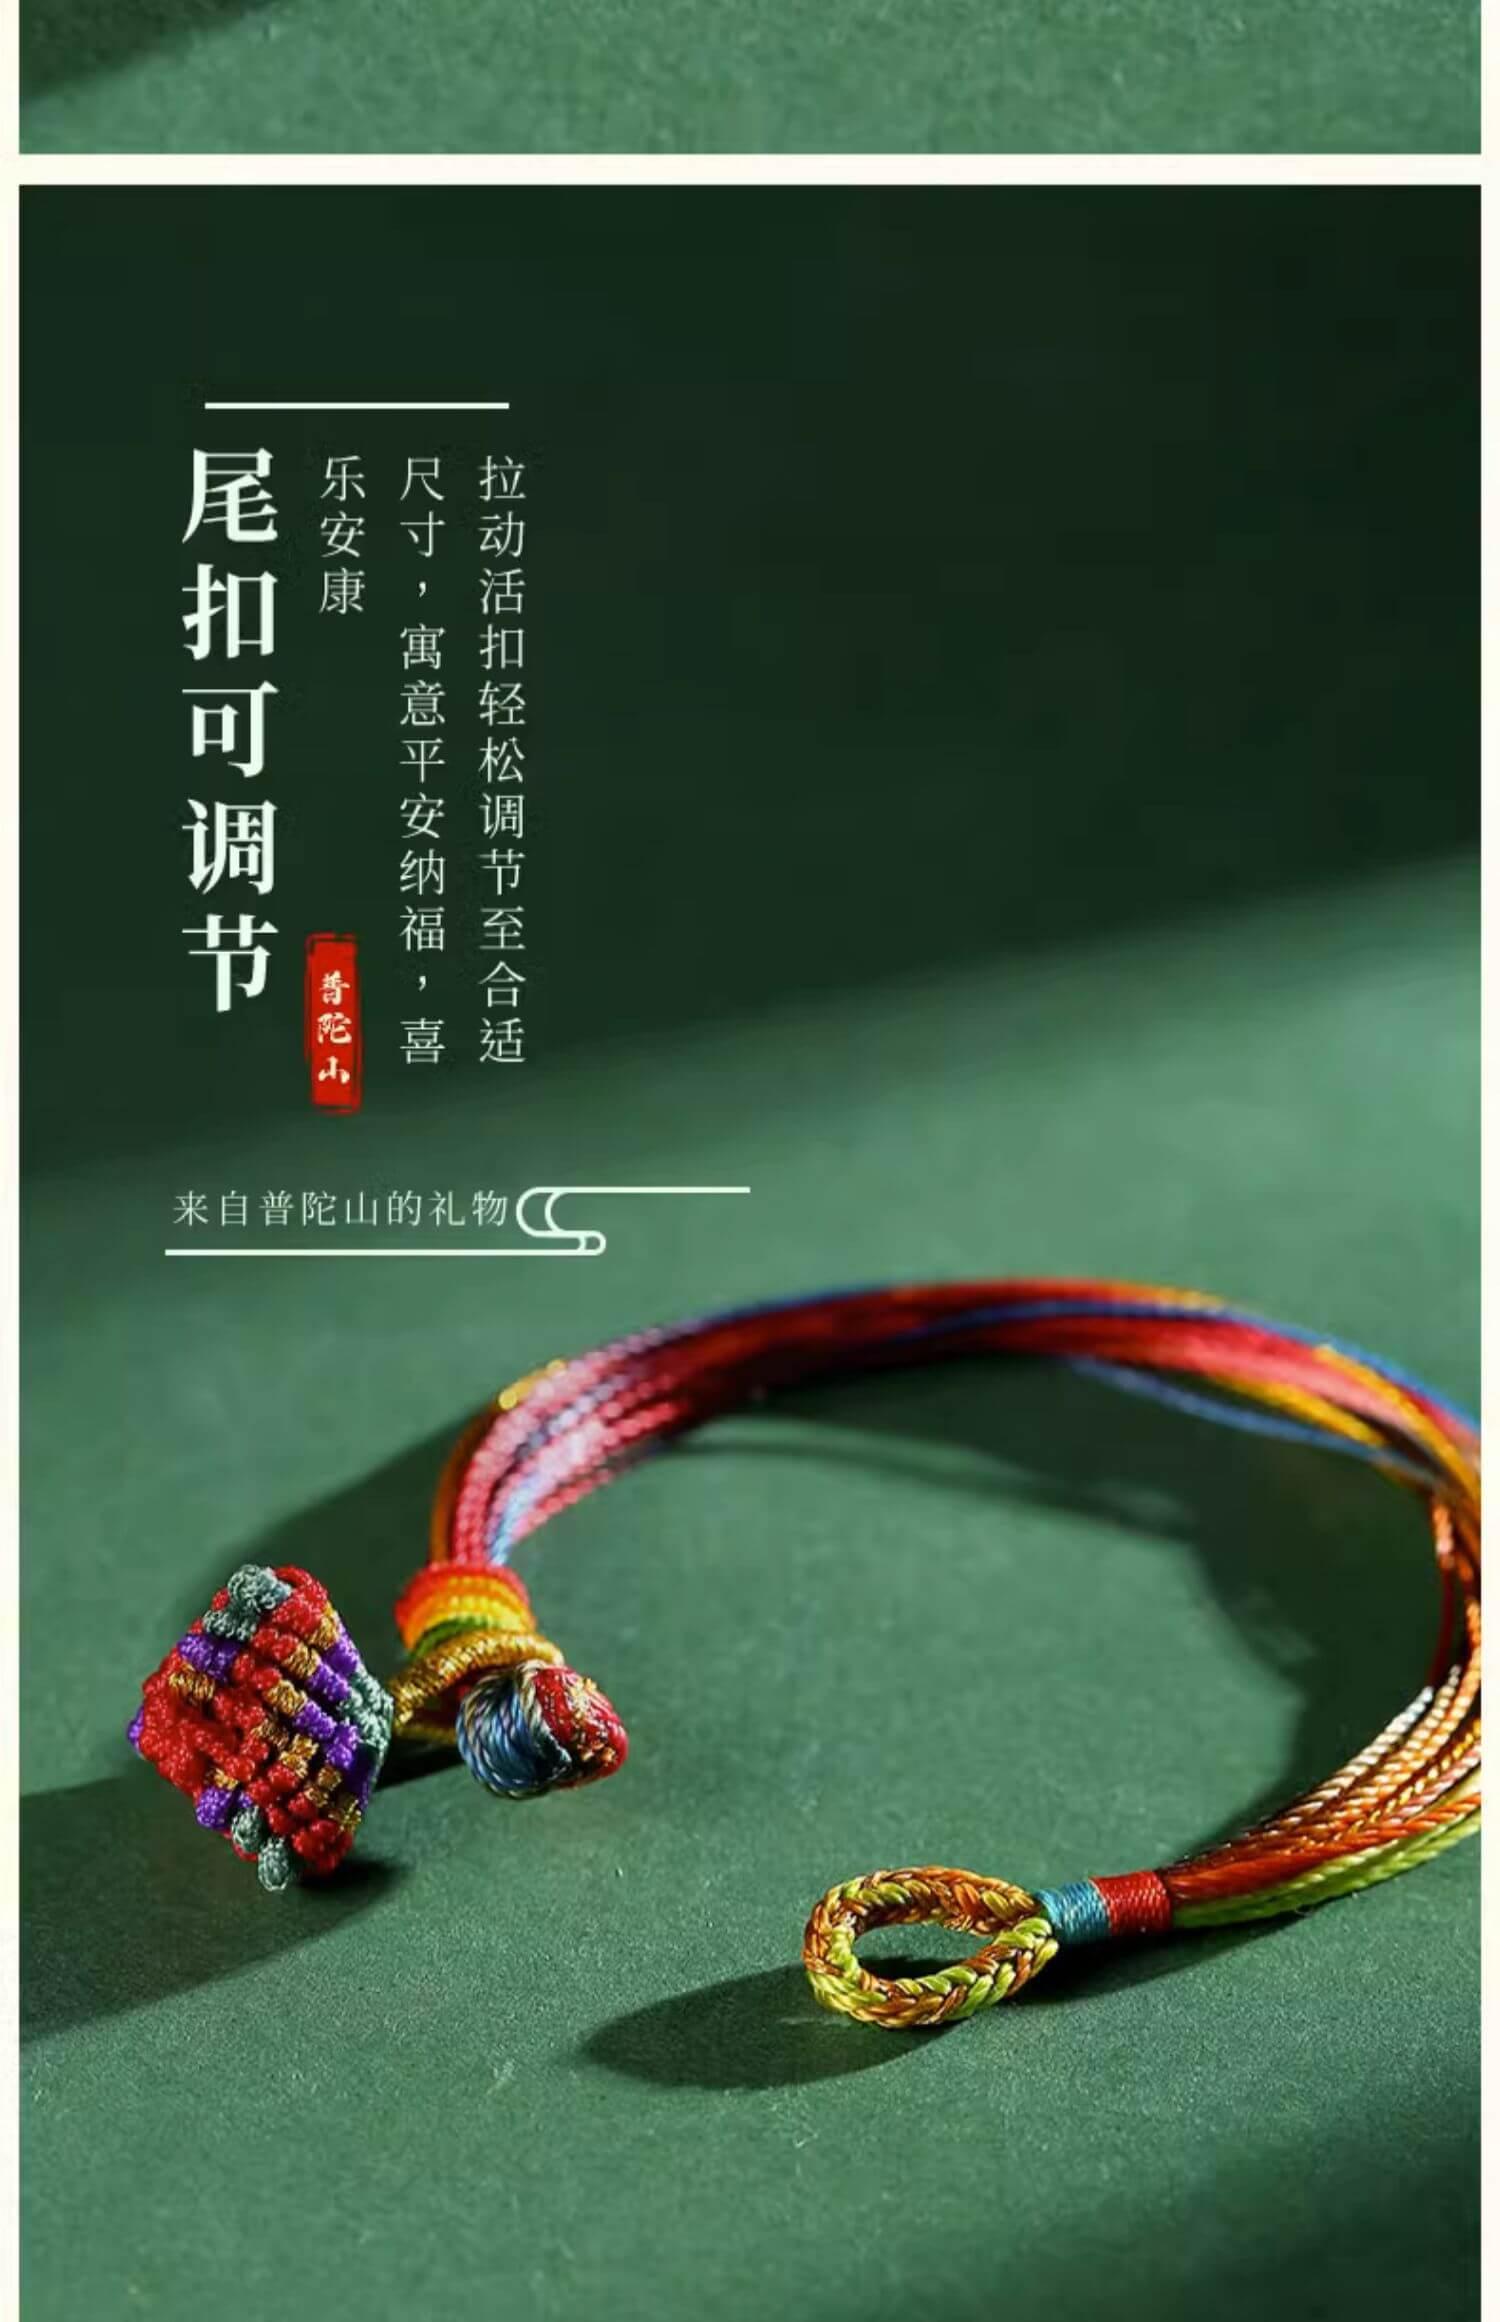 《Colorful Rice Dumplings》 Dragon Boat Festival Children's and Adults' Good Luck Colorful Rope